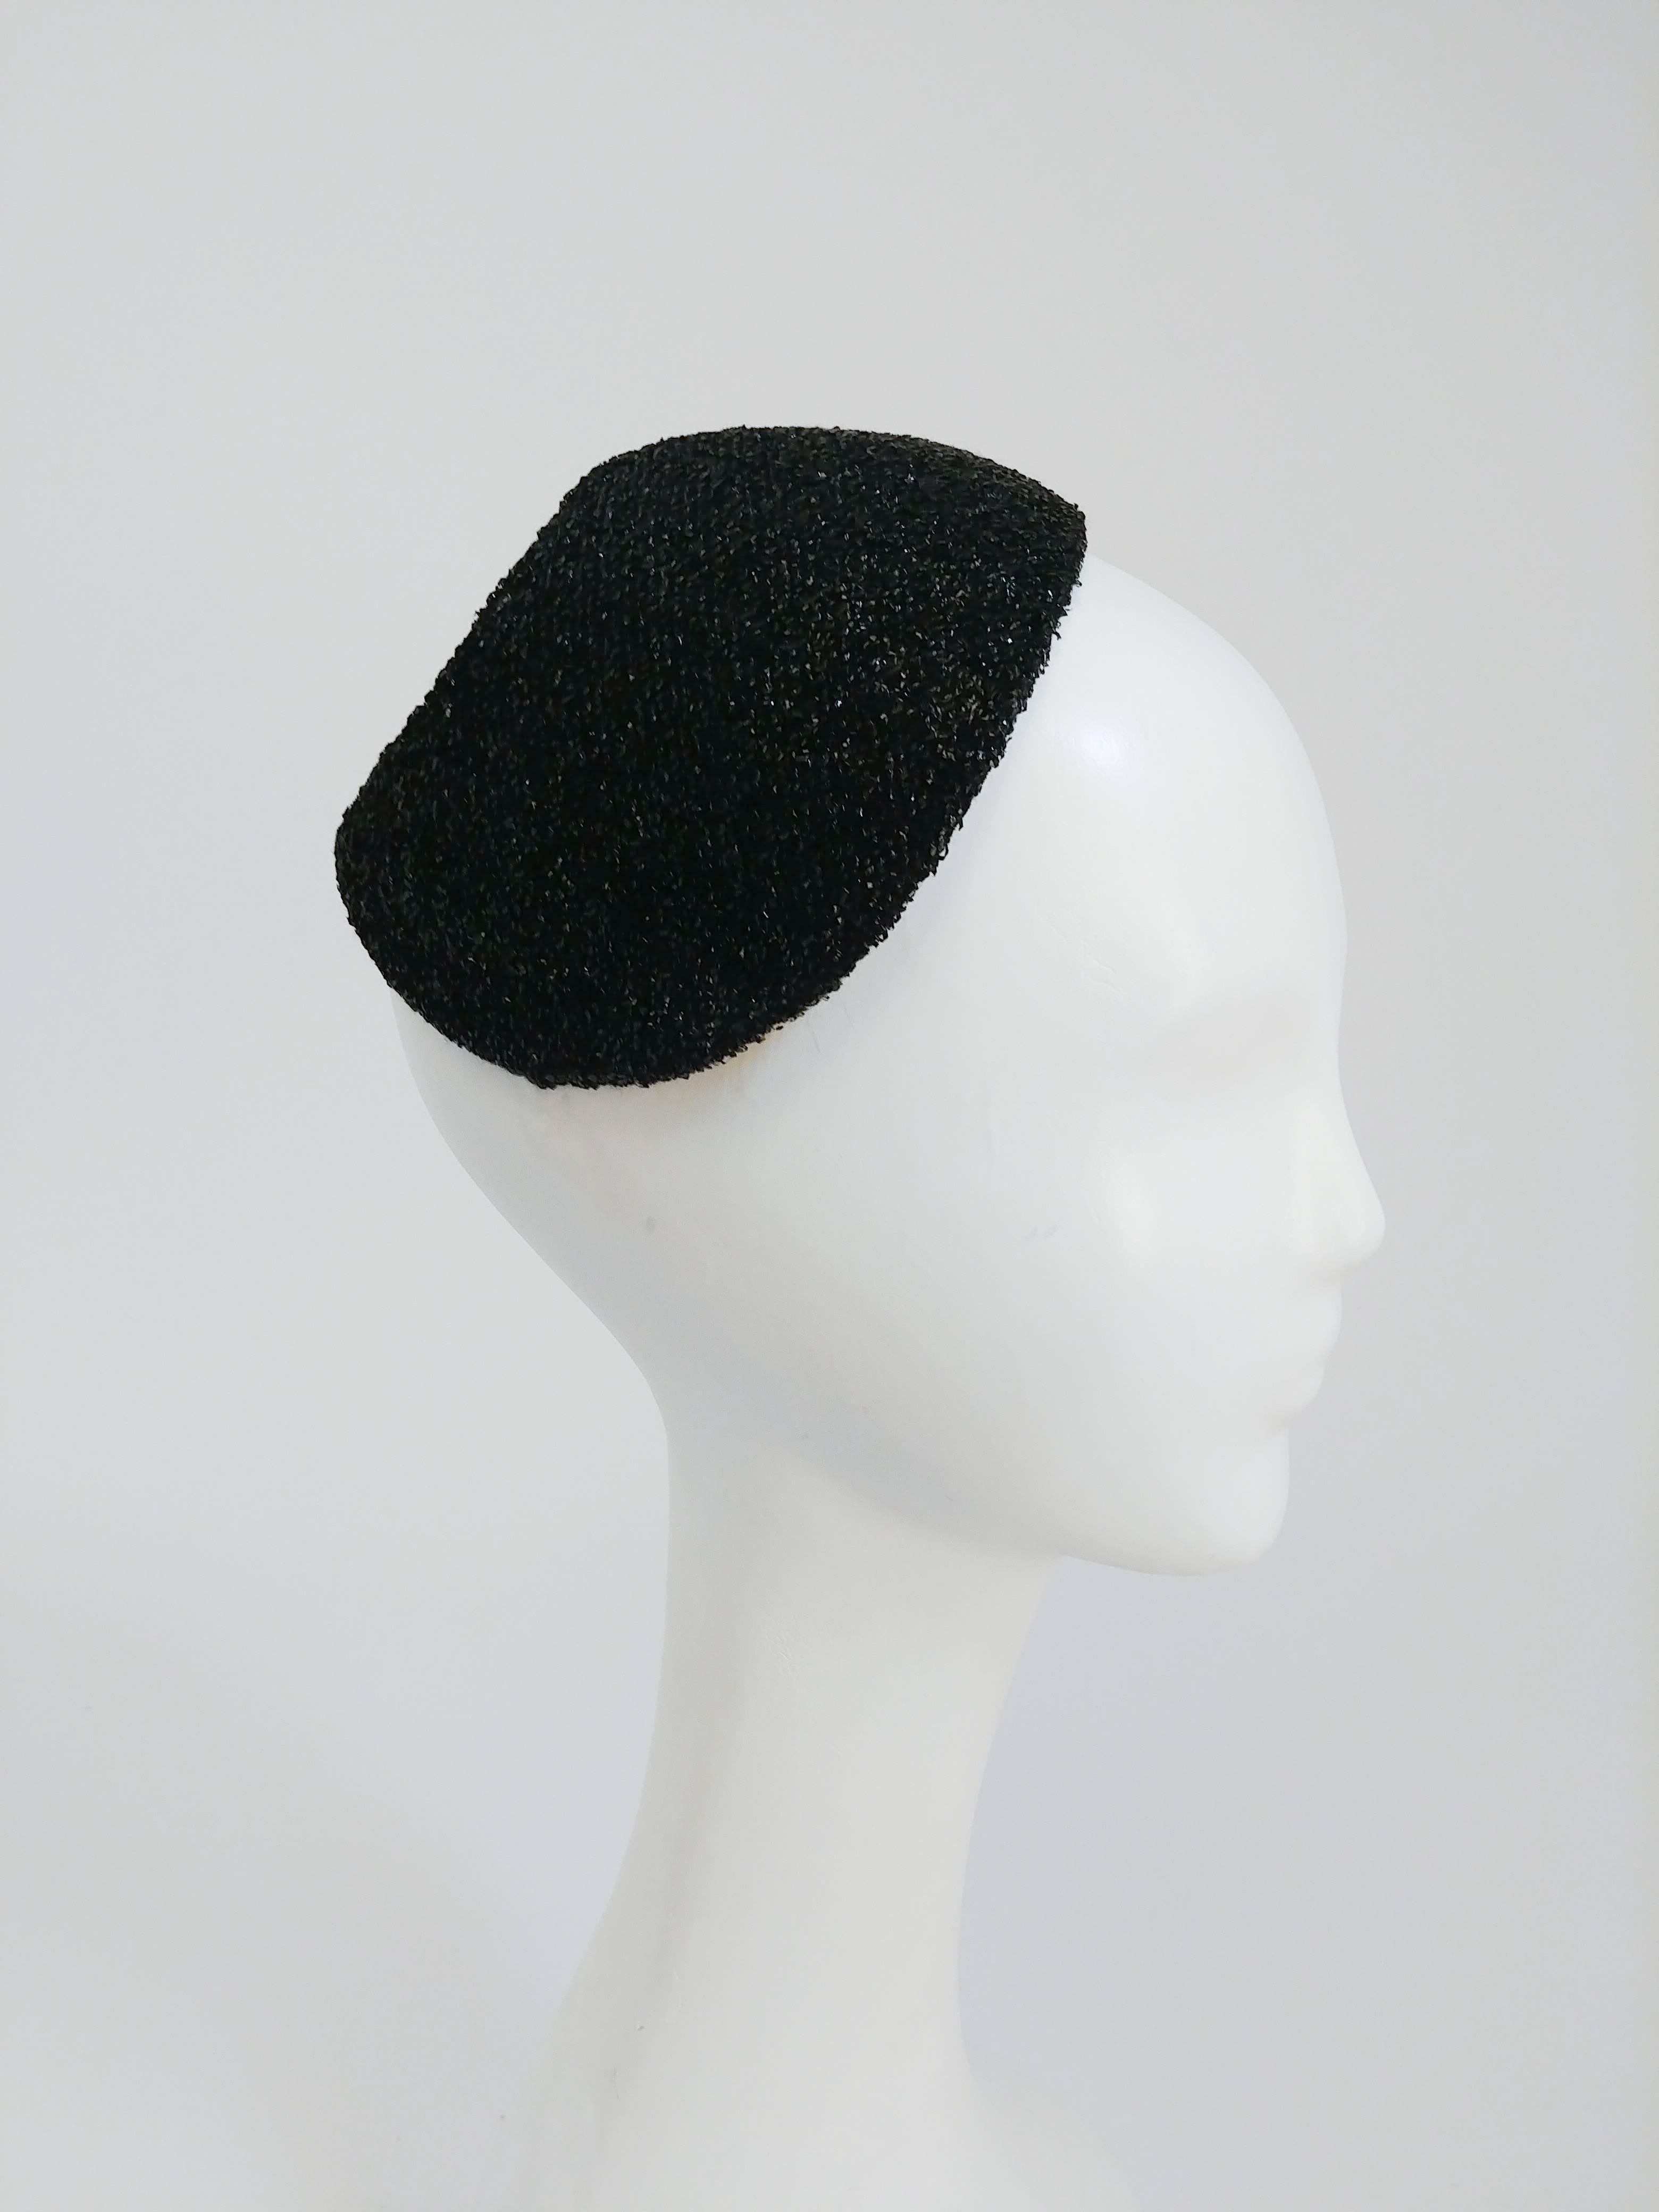 Women's 1950s Black I. Magnin Cocktail Hat with Rhinestone Crescent Moon